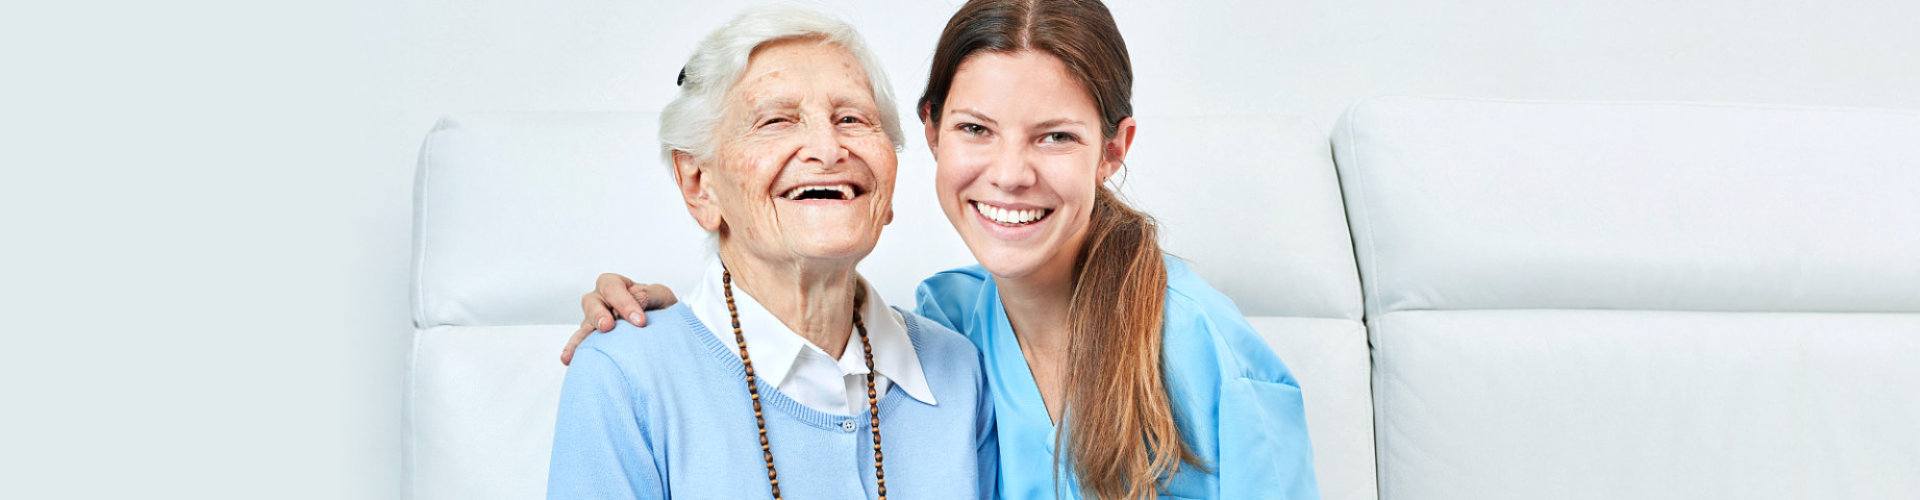 a social worker and senior woman smiling together